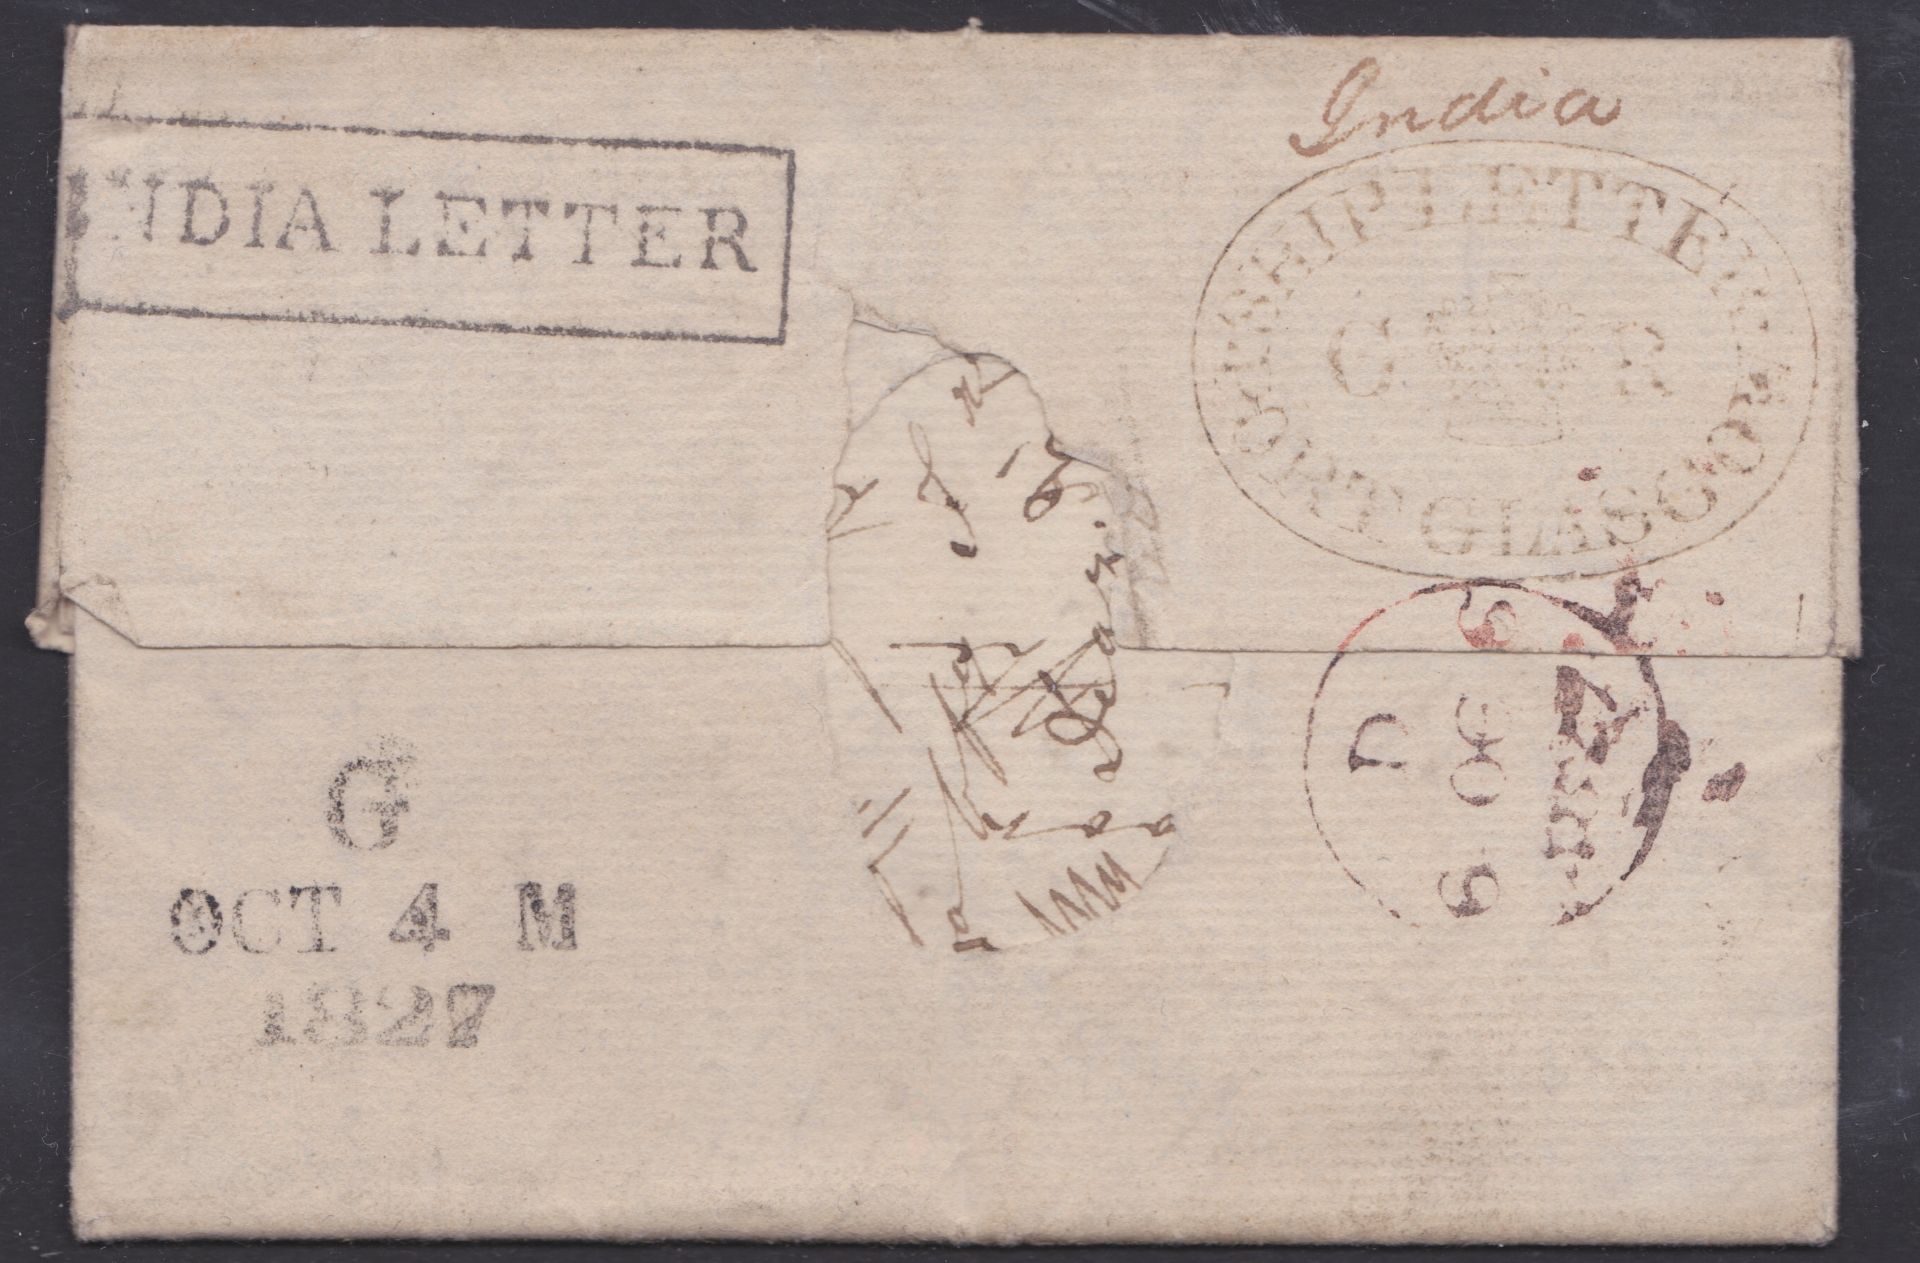 G.B. - SHIP LETTERS - GLASGOW / LONDON / TRISTAN DA CUNHA 1827 - Entire Letter (hole caused by